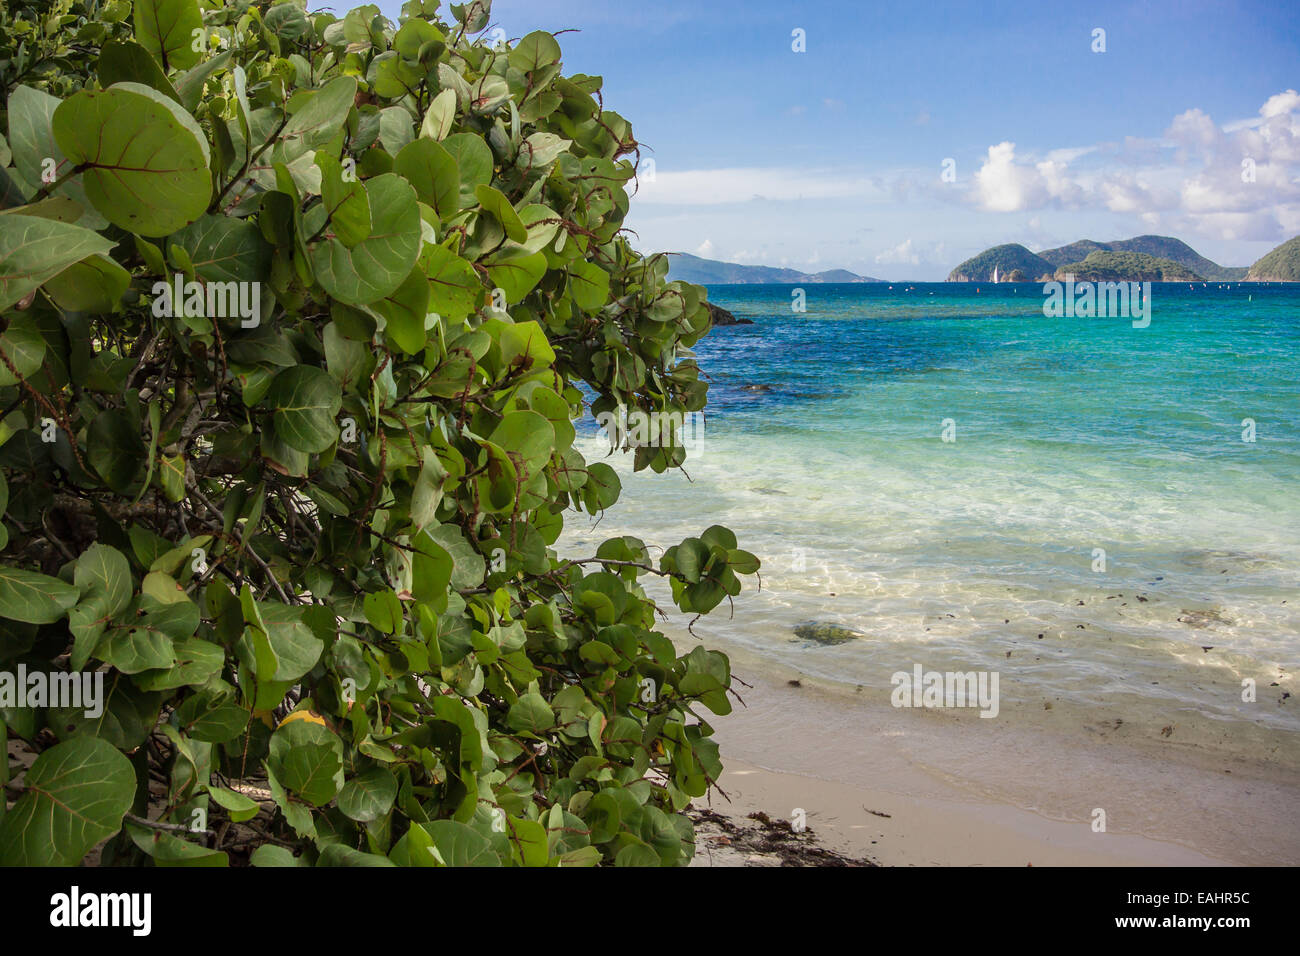 Bright green leaves in front of the brilliant blue waters of the Caribbean Stock Photo